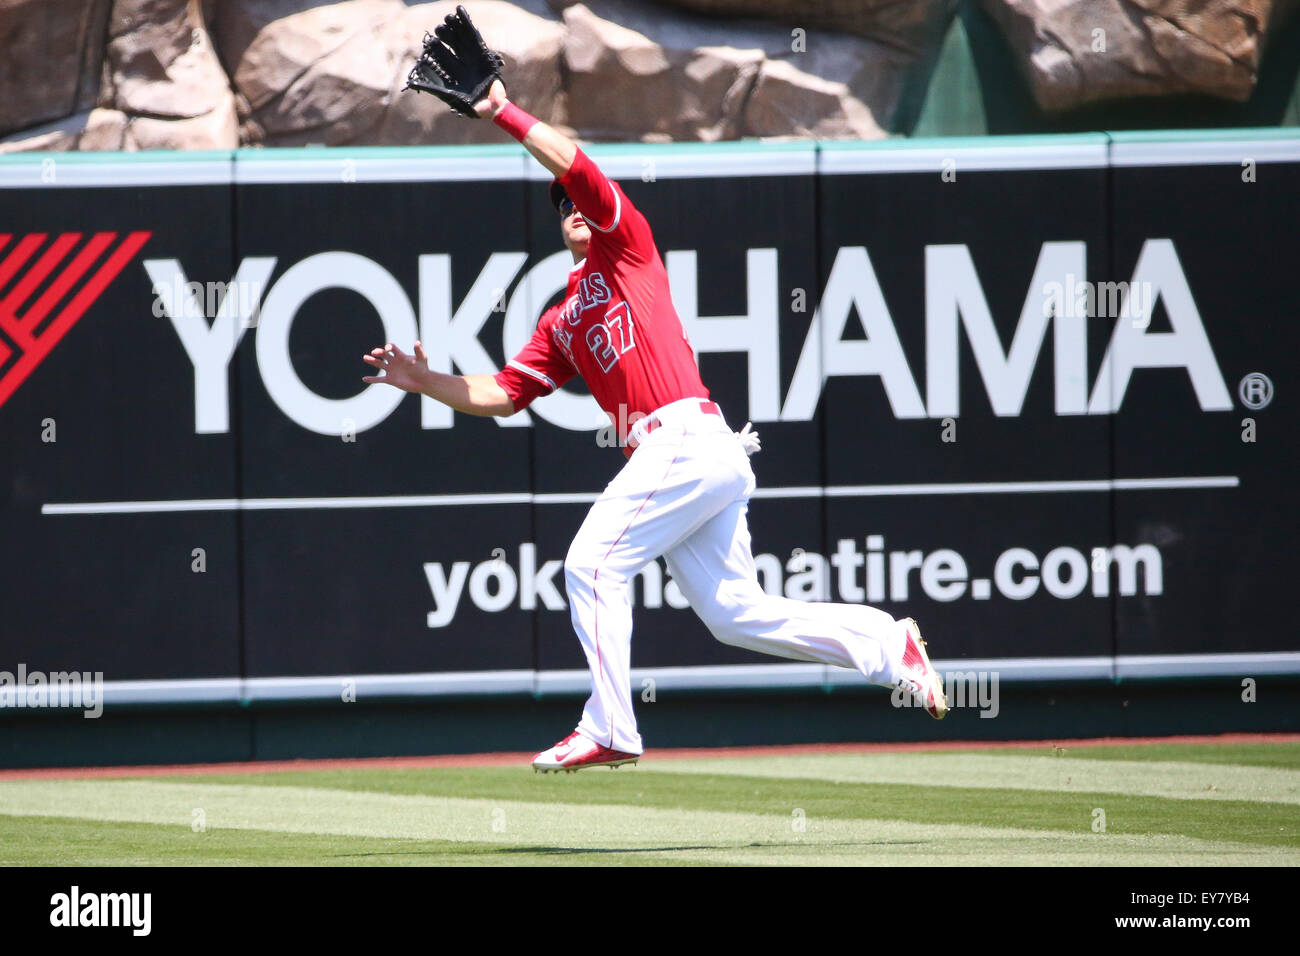 Anaheim, California, USA. 23rd July, 2015. Los Angeles Angels center fielder Mike Trout #27 makes a leaping catch in the game between the Minnesota Twins and Los Angeles Angels of Anaheim, Angel Stadium in Anaheim, CA, Photographer: Peter Joneleit Credit:  Cal Sport Media/Alamy Live News Stock Photo